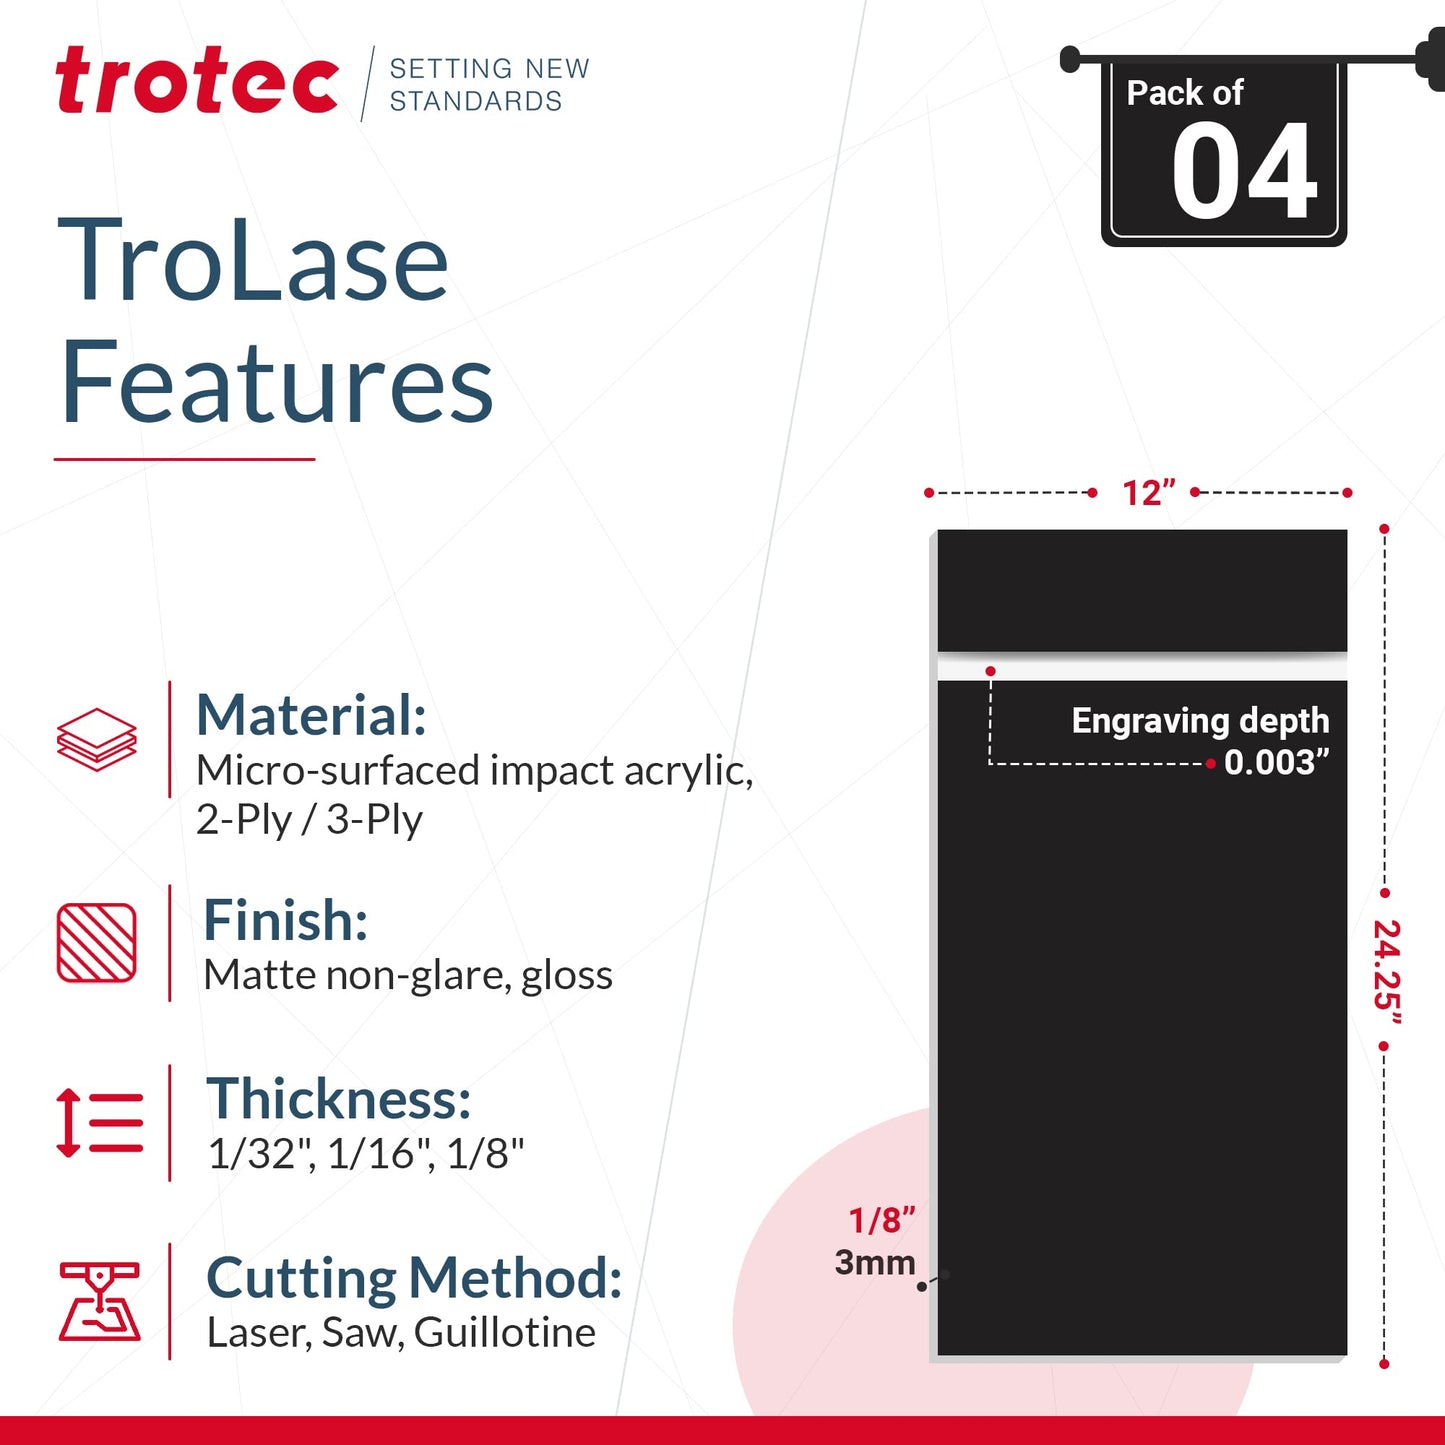 Trotec TroLase | 12"x24.25"x1/8", 4 Pcs | Black/White | 2 Ply | Modified Acrylic | Laser Engraving Double Color Plastic Sheet | Engraving Blanks for